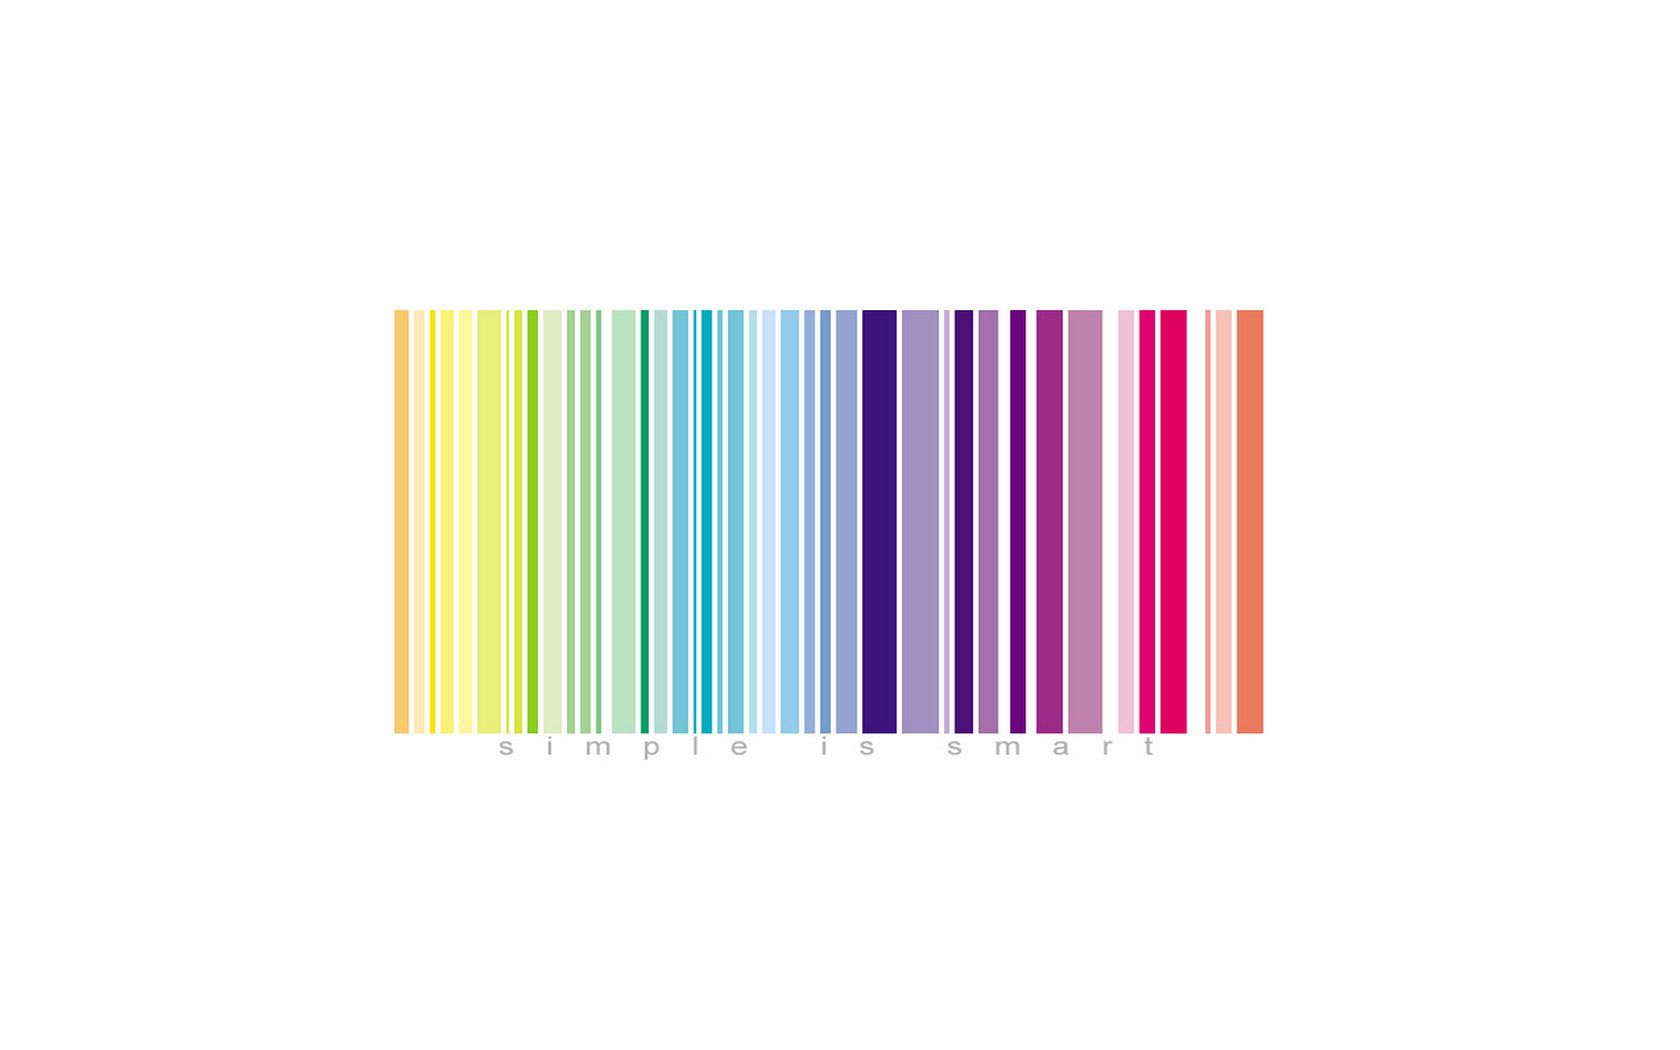 wallpapers motley, white, multicolored, minimalism, stripes, streaks, barcode, bar code